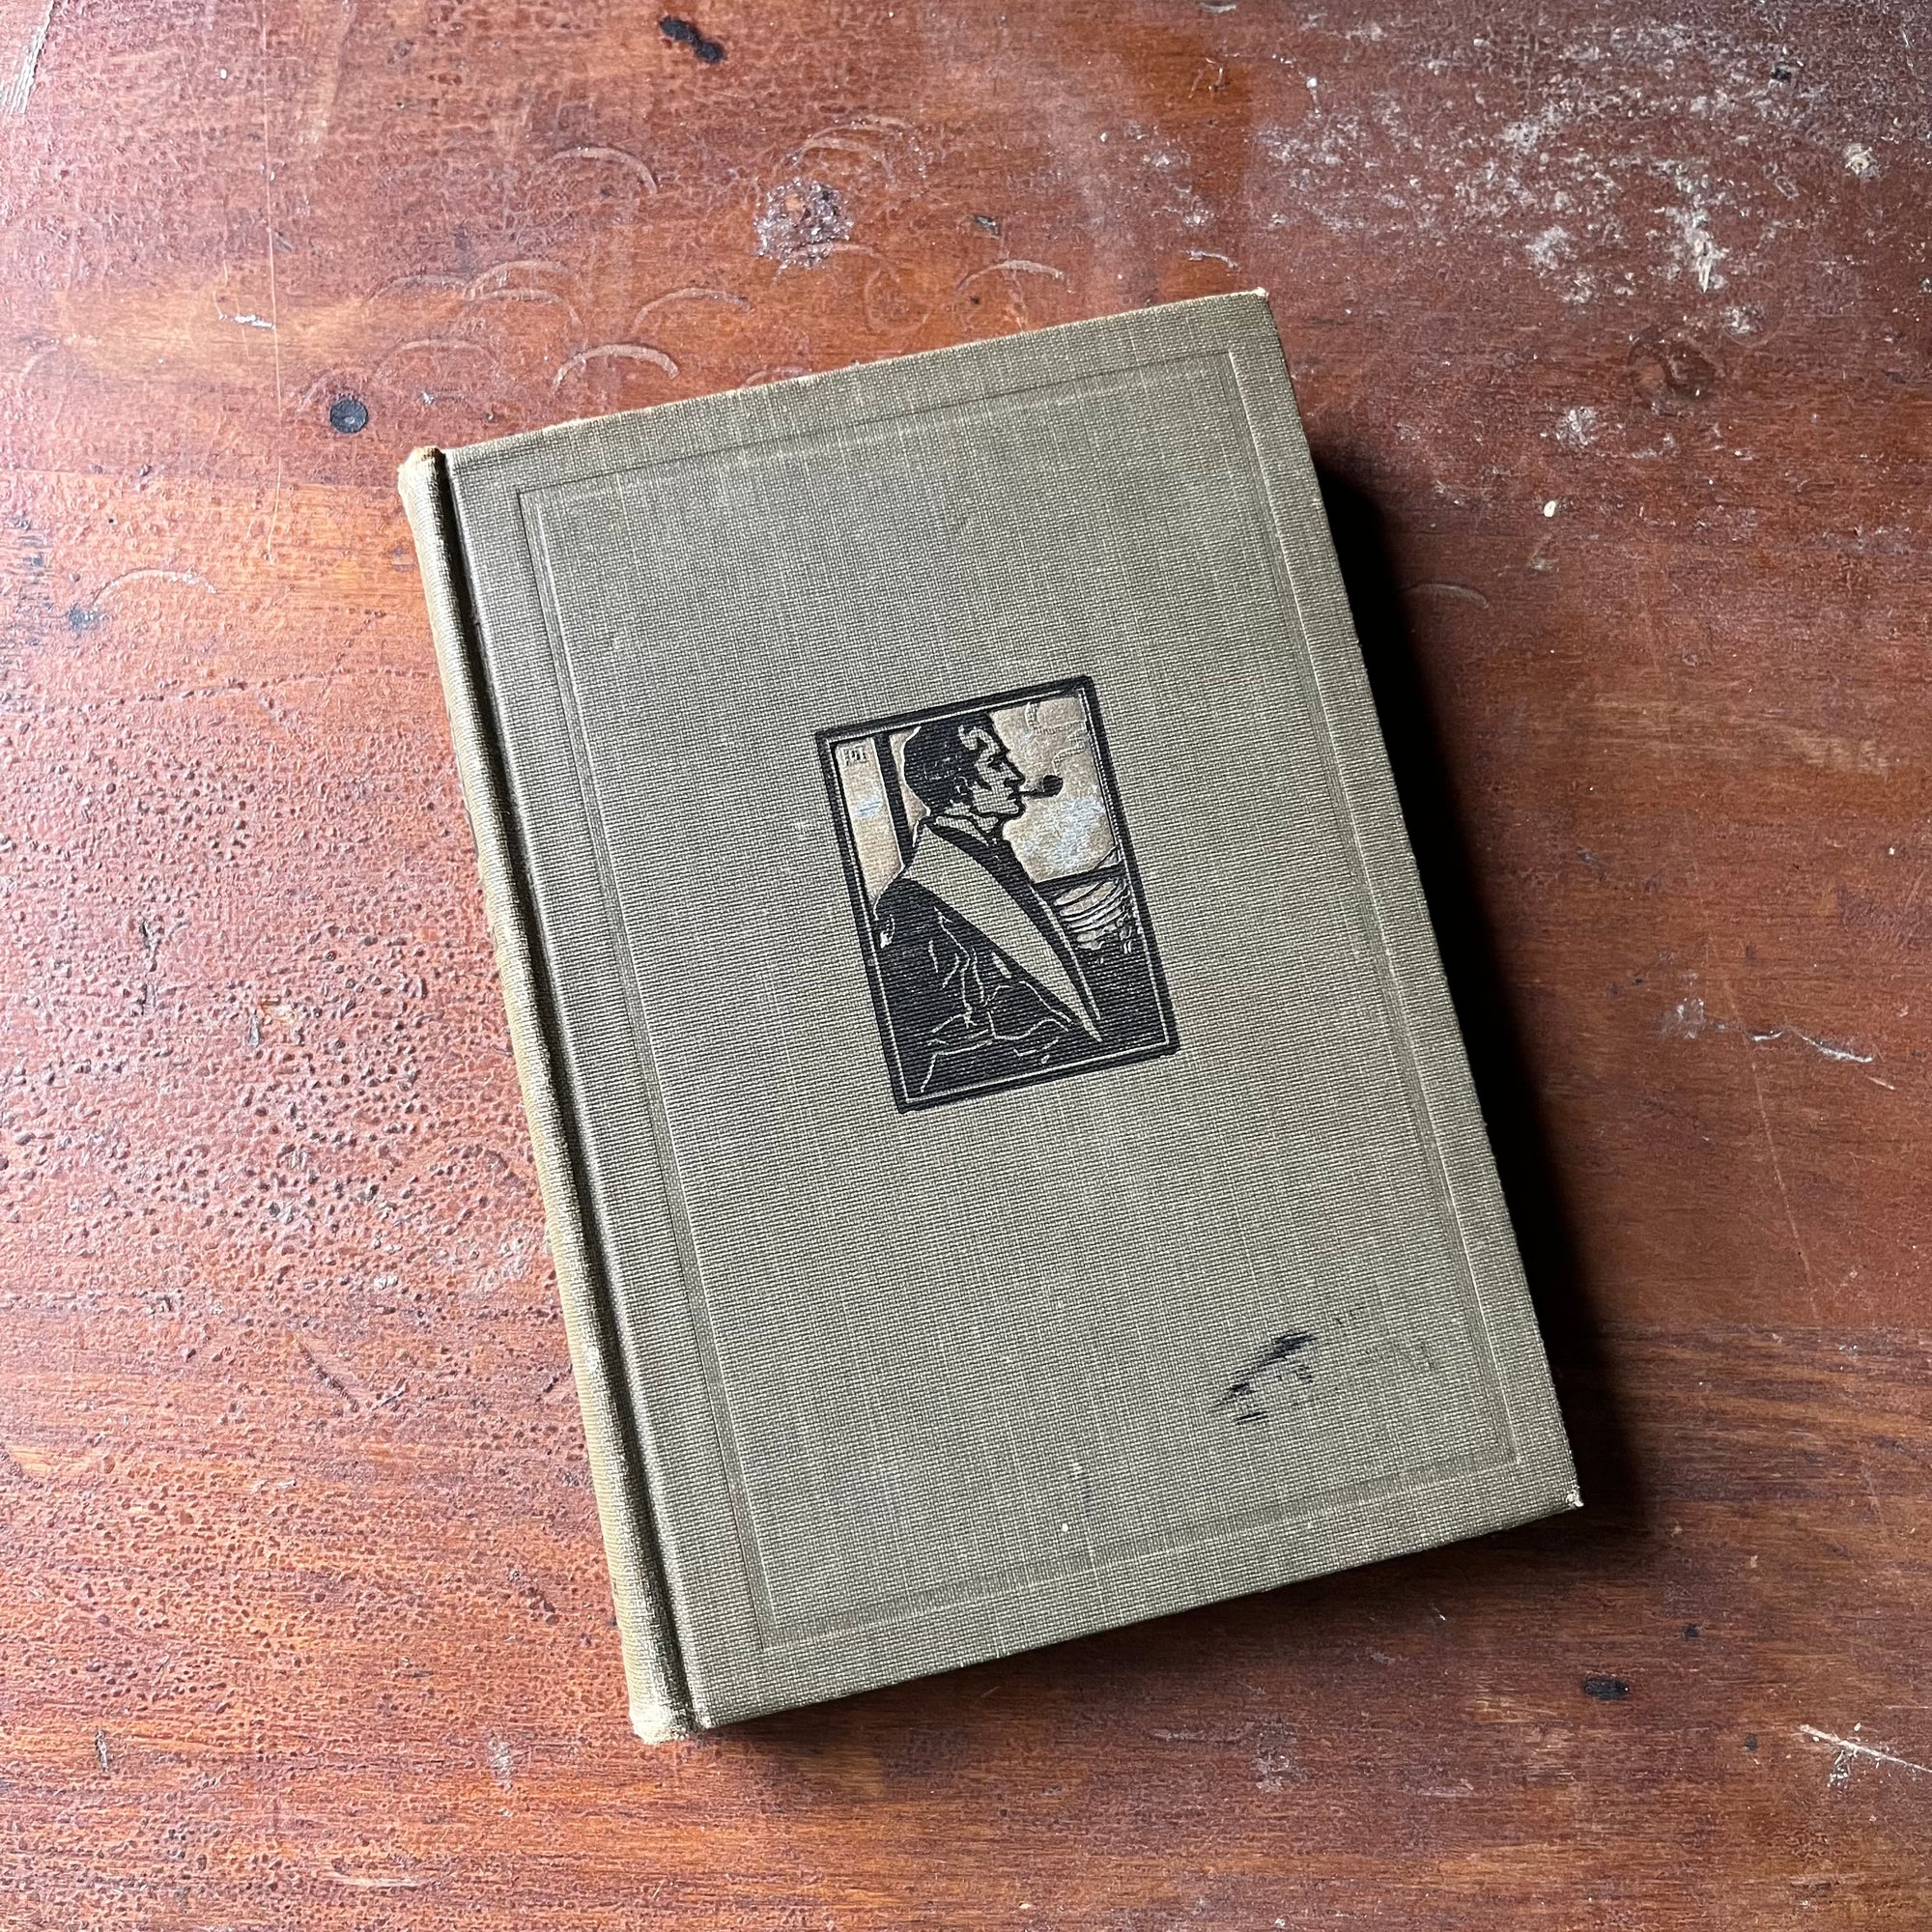 vintage mystery book - Conan Doyle's Best Books in Three Volumes-The White Company-Beyond the City-Sherlock Holmes Edition written by Sir Arthur Conan Doyle - view of the embossed front cover with a small illustration of Sherlock Holmes Smoking a Pipe